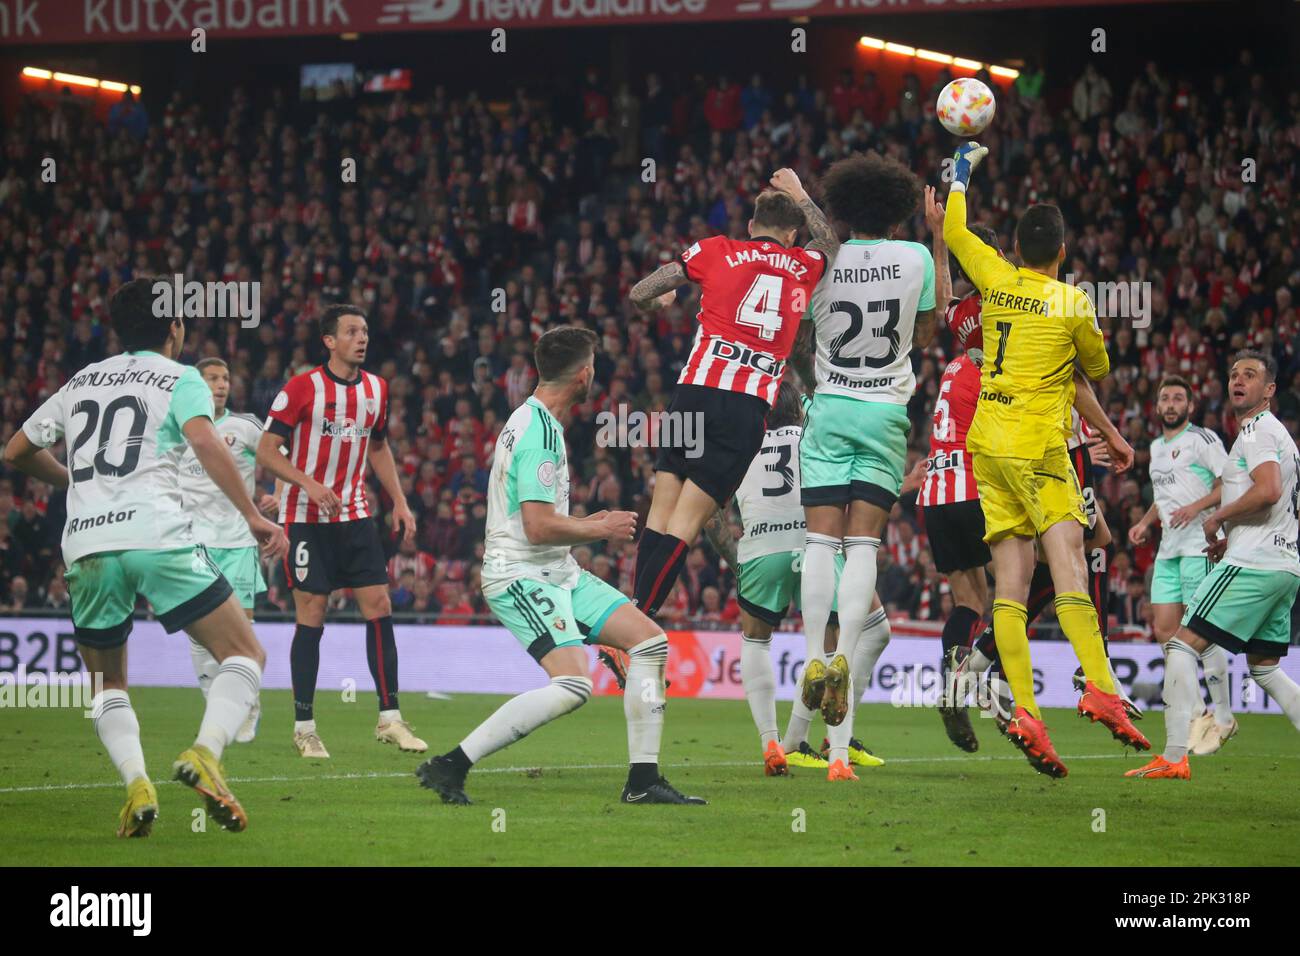 Bilbao, Spain. 04th Apr, 2023. CA Osasuna's goalkeeper, S. Herrera (1, R) clears the ball before the jump of Aridane (23, 2R) and Iñigo Martinez (4, L) during the second leg of the semifinals of the SM El Rey Cup between Athletic Club and CA Osasuna, on April 04, 2023, at the San Mames Stadium, Bilbao, Spain. (Photo by Alberto Brevers/Pacific Press/Sipa USA) Credit: Sipa USA/Alamy Live News Stock Photo